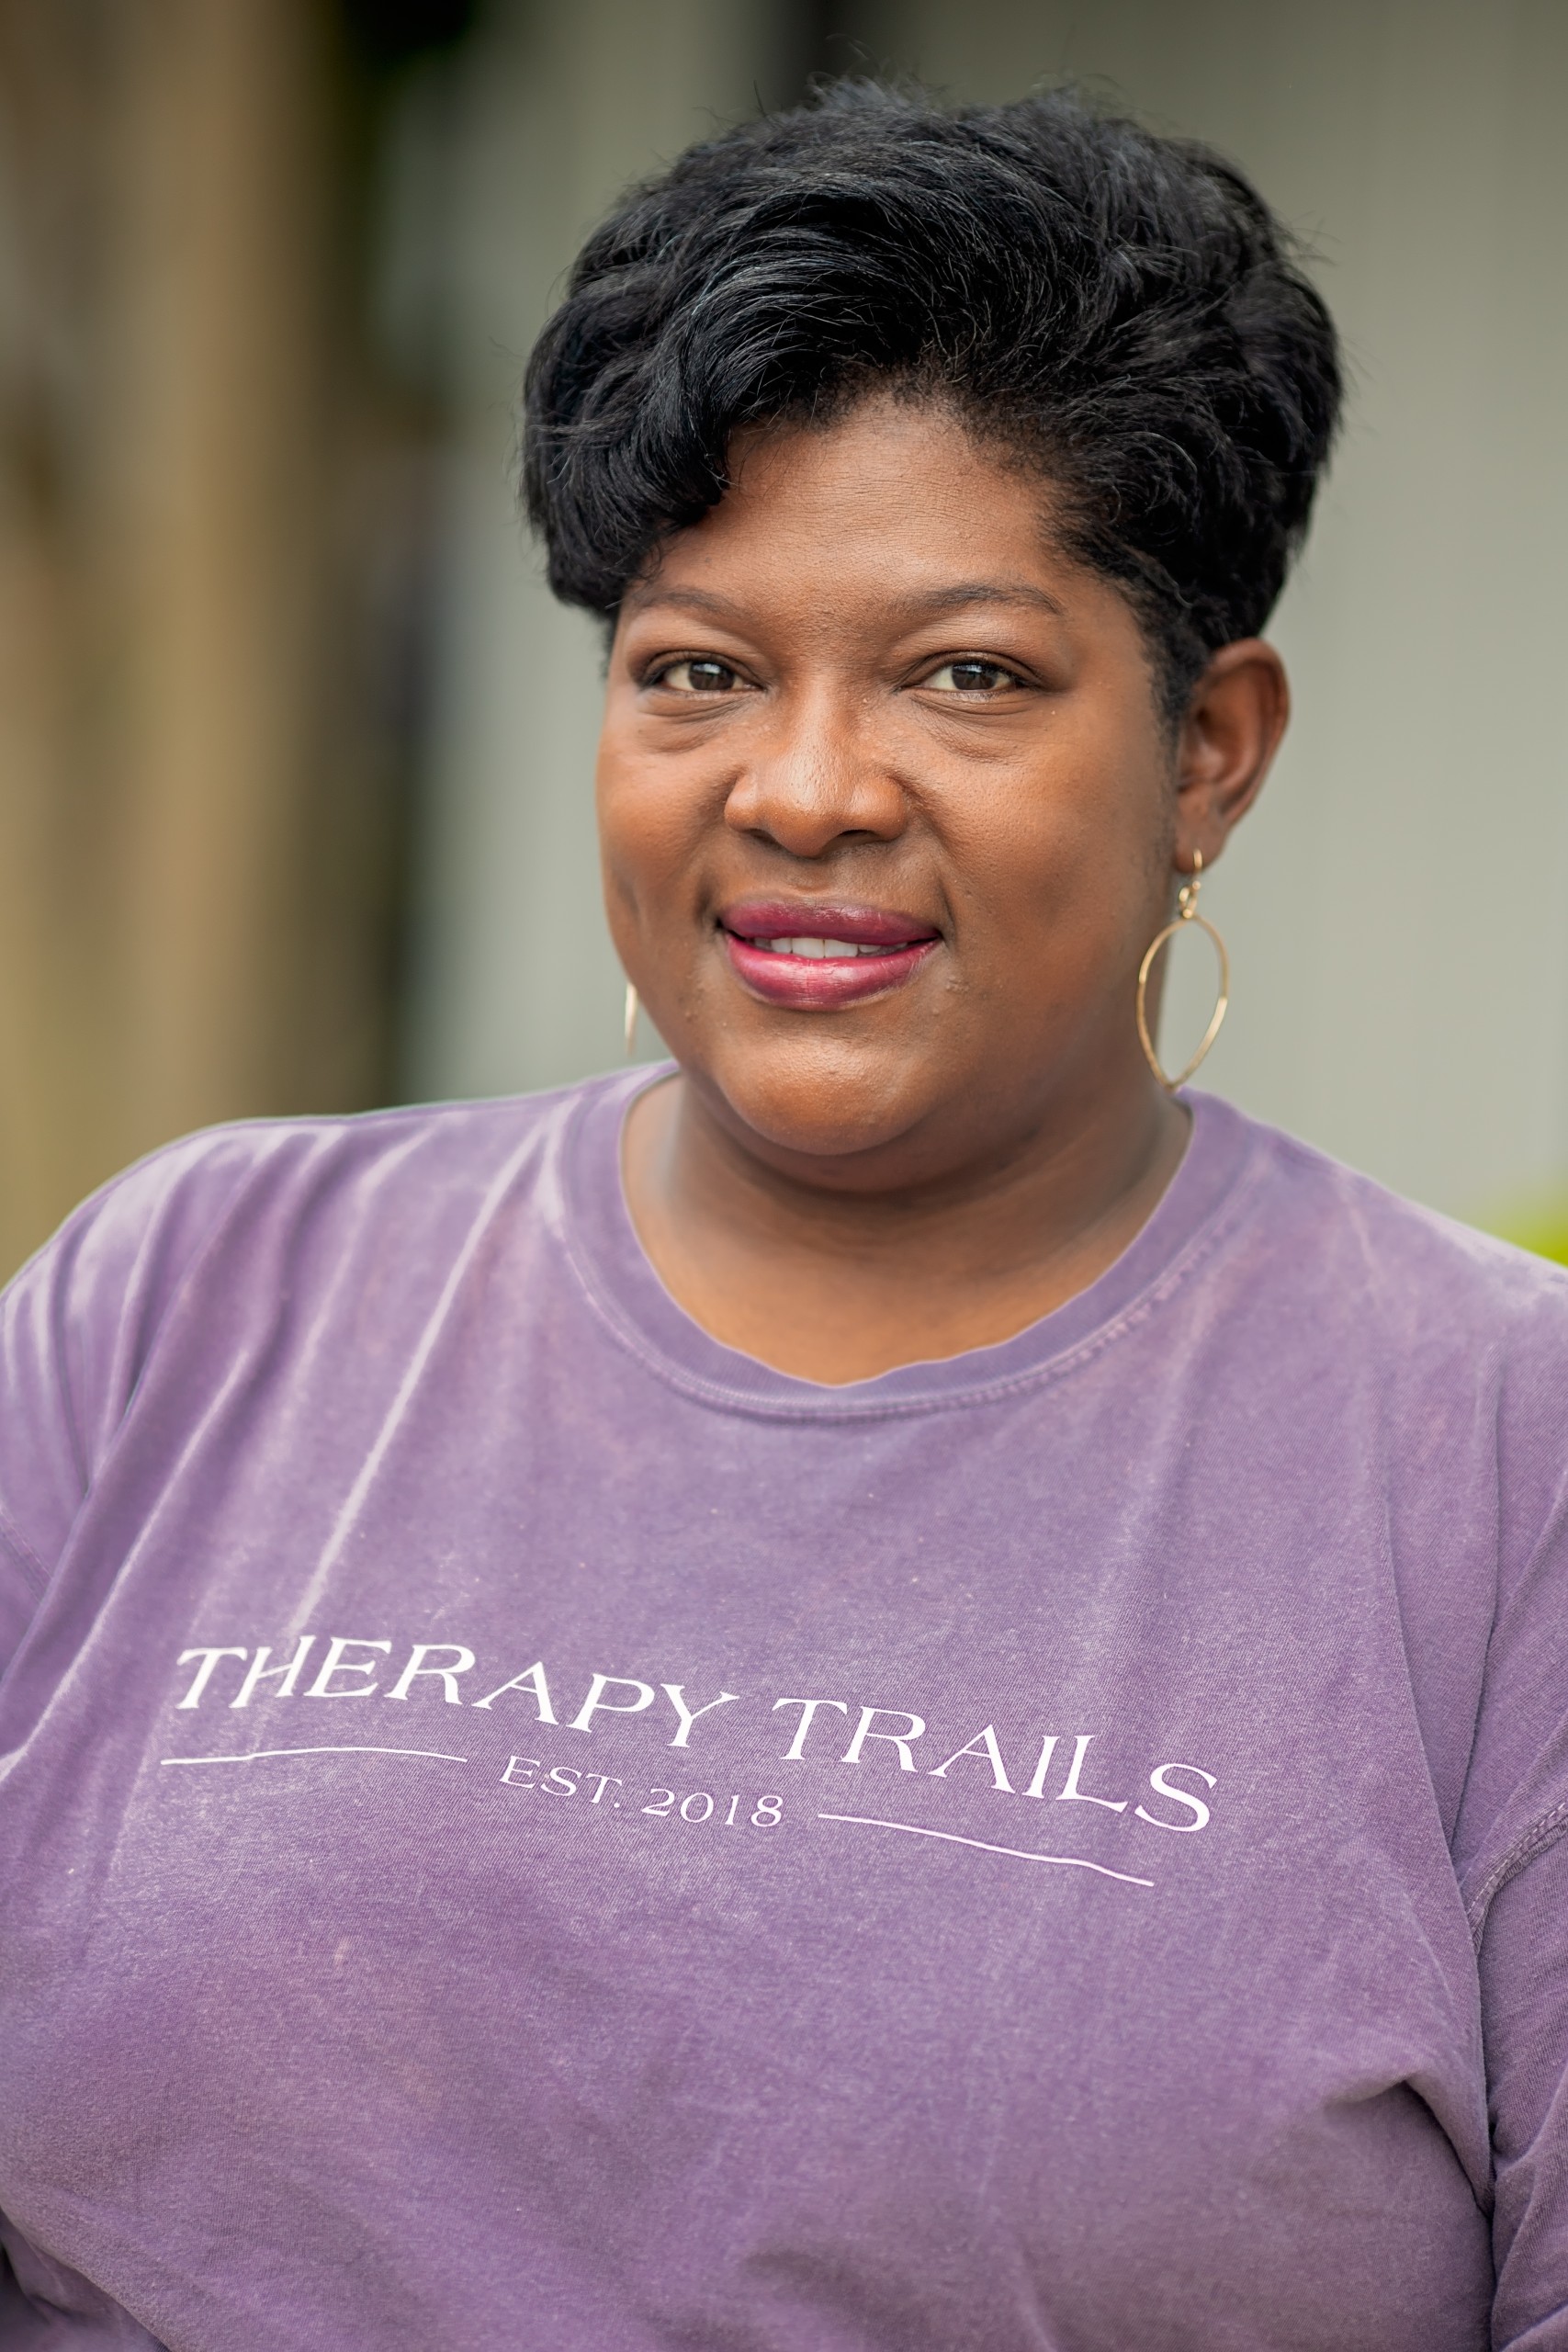 speech therapy occupational therapy pediatric evans georgia